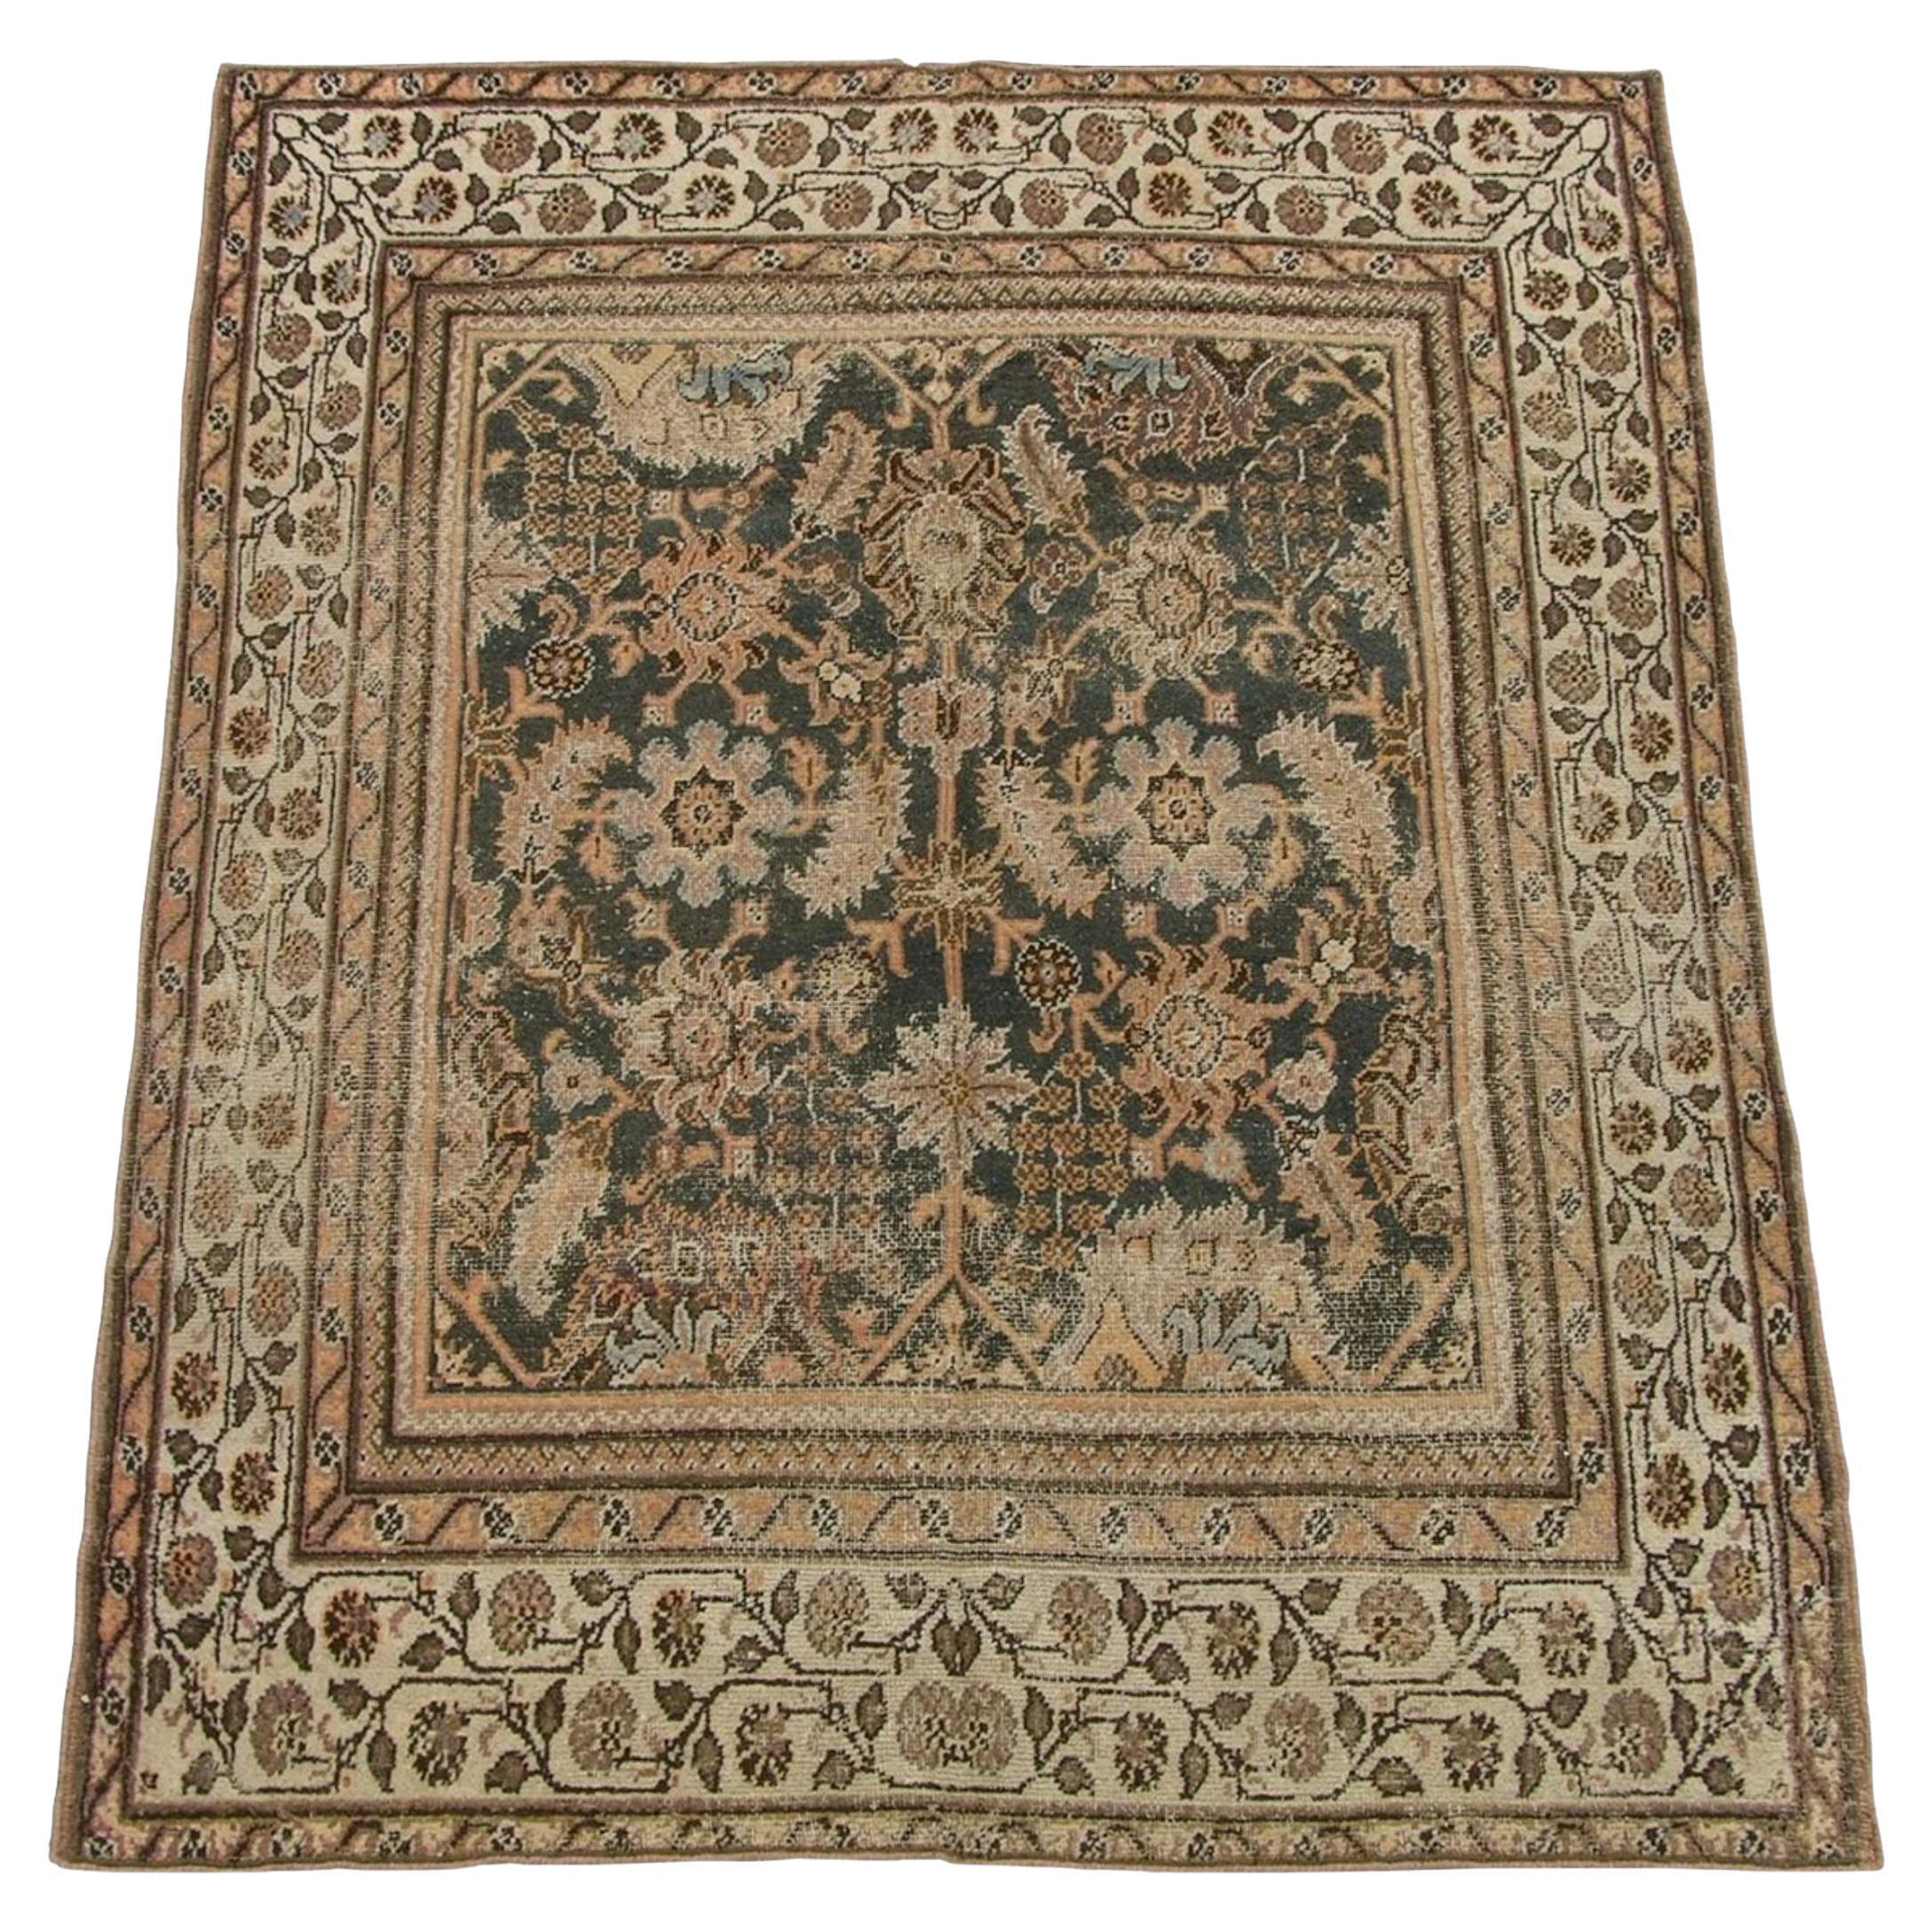 Antique Indian Rug 7.1x5.8 For Sale